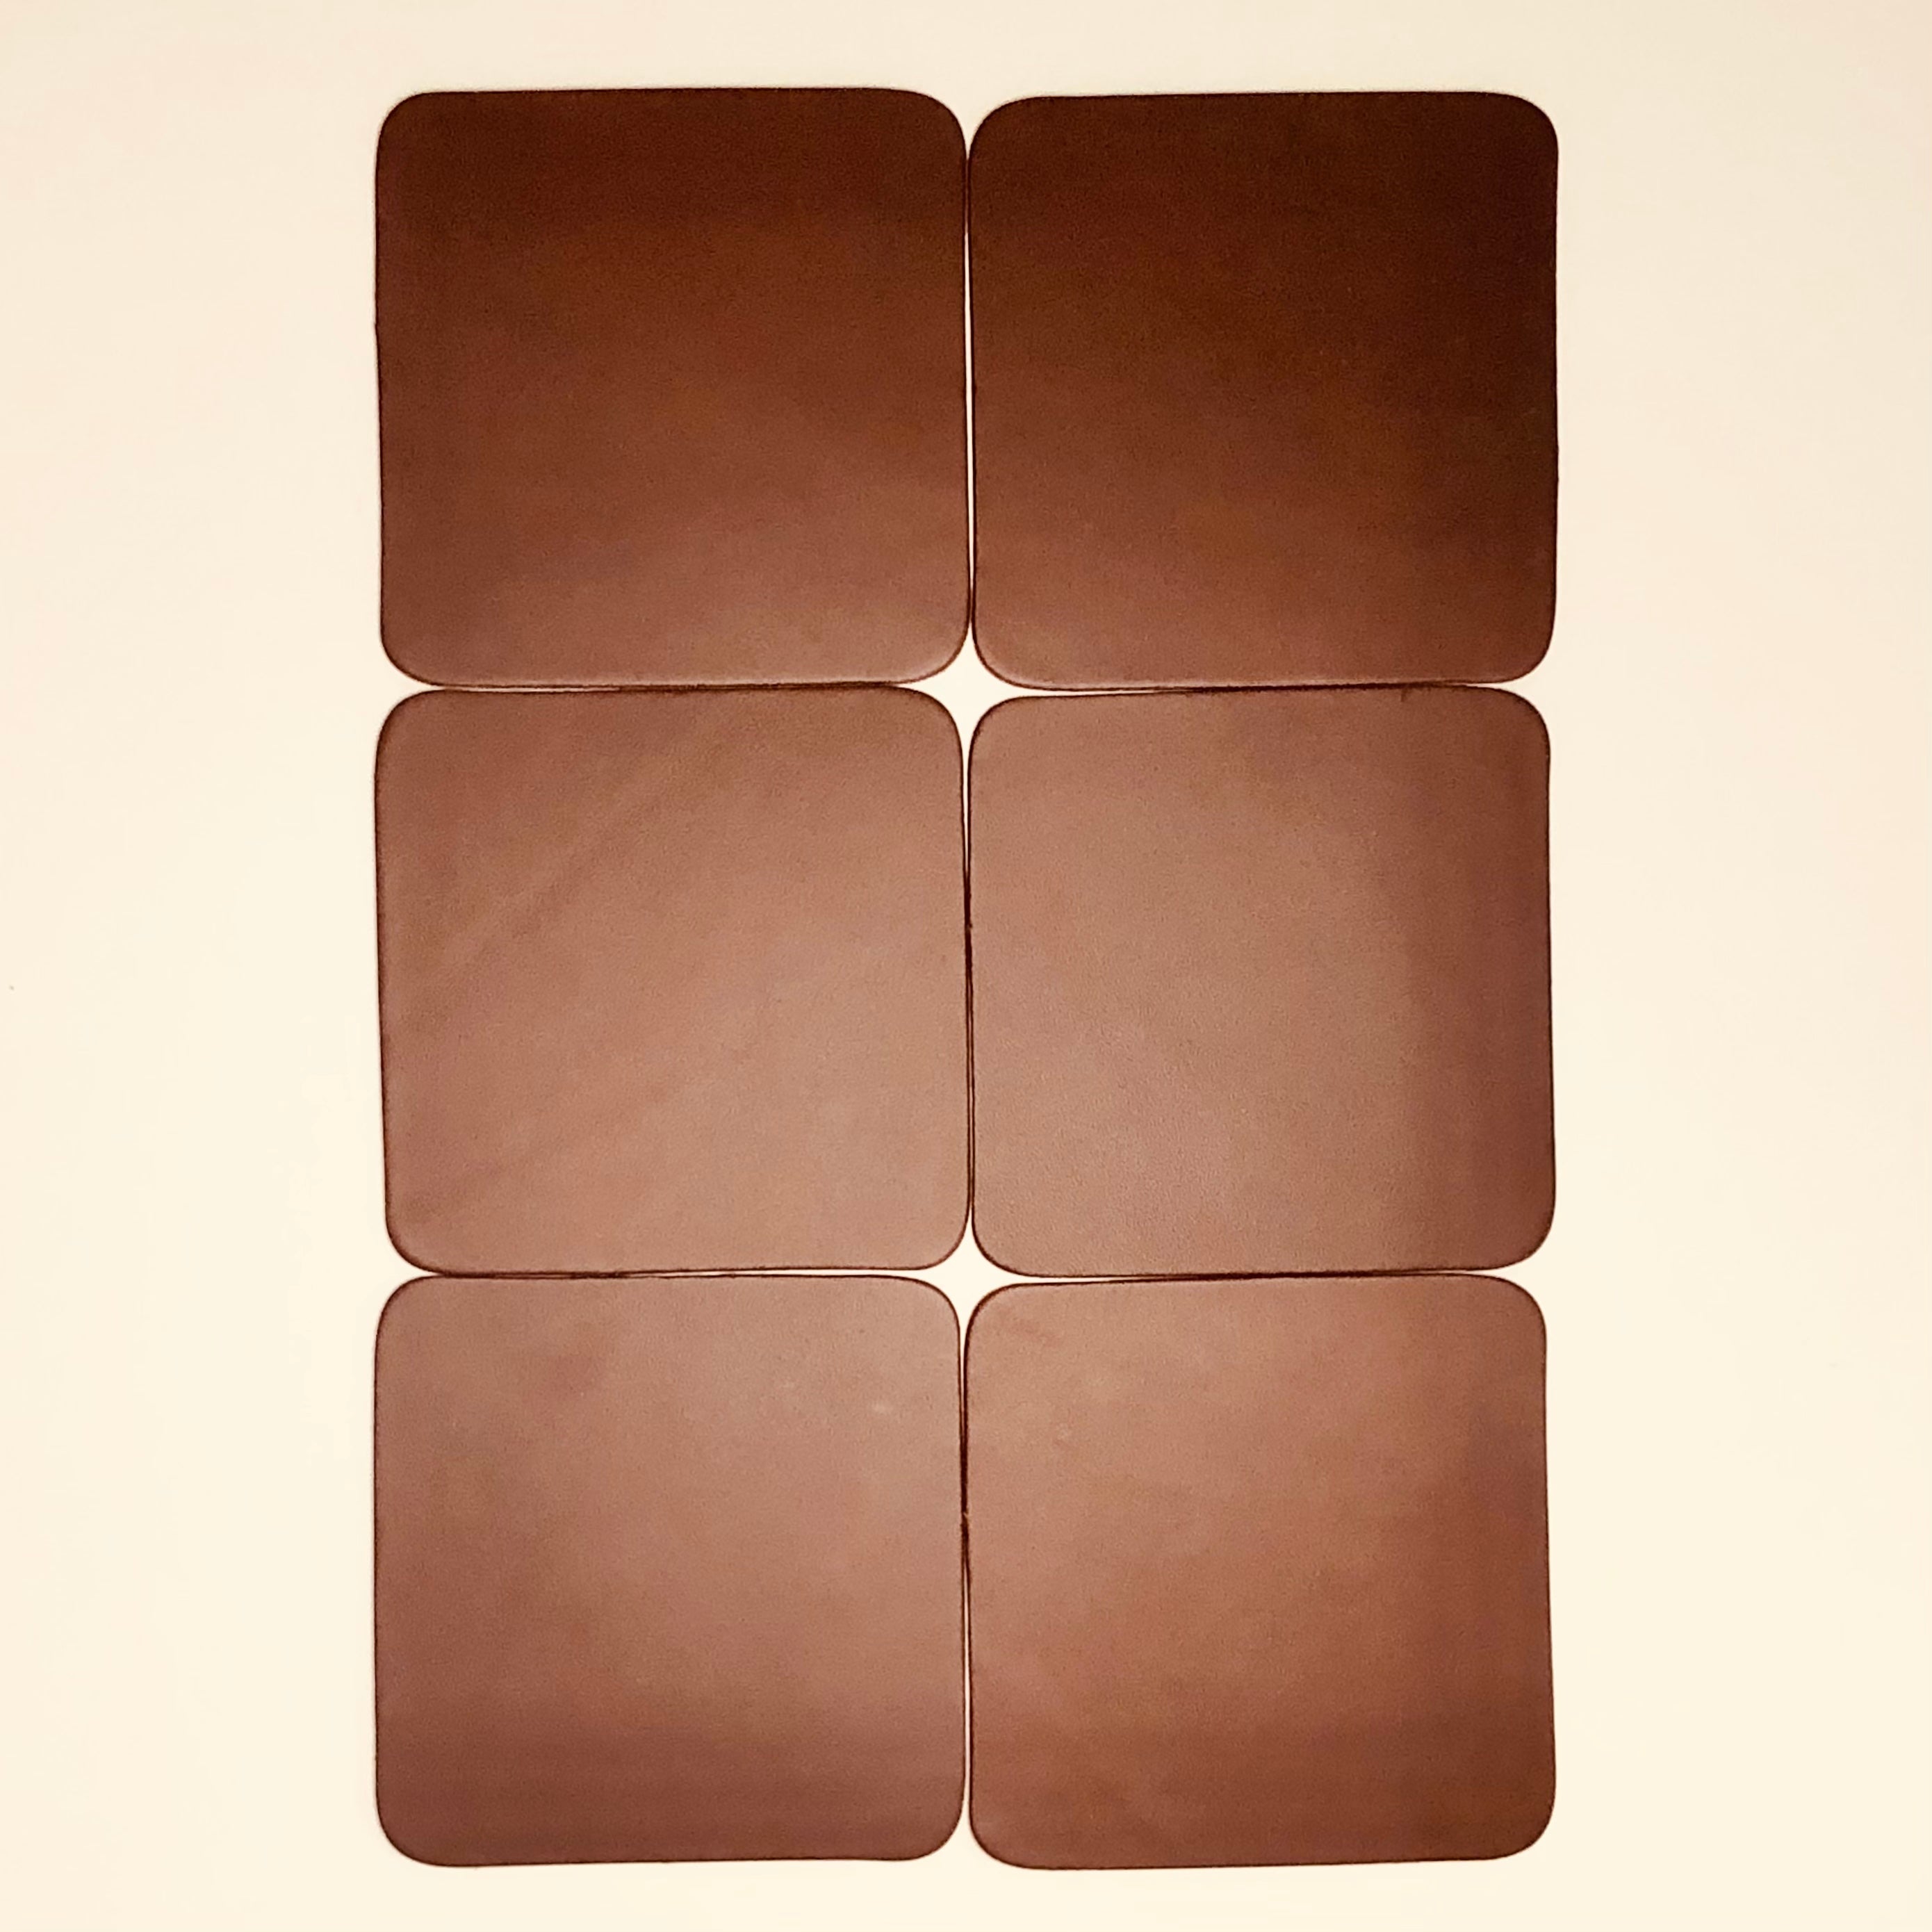 Discontinued Set of 6x Square Coasters